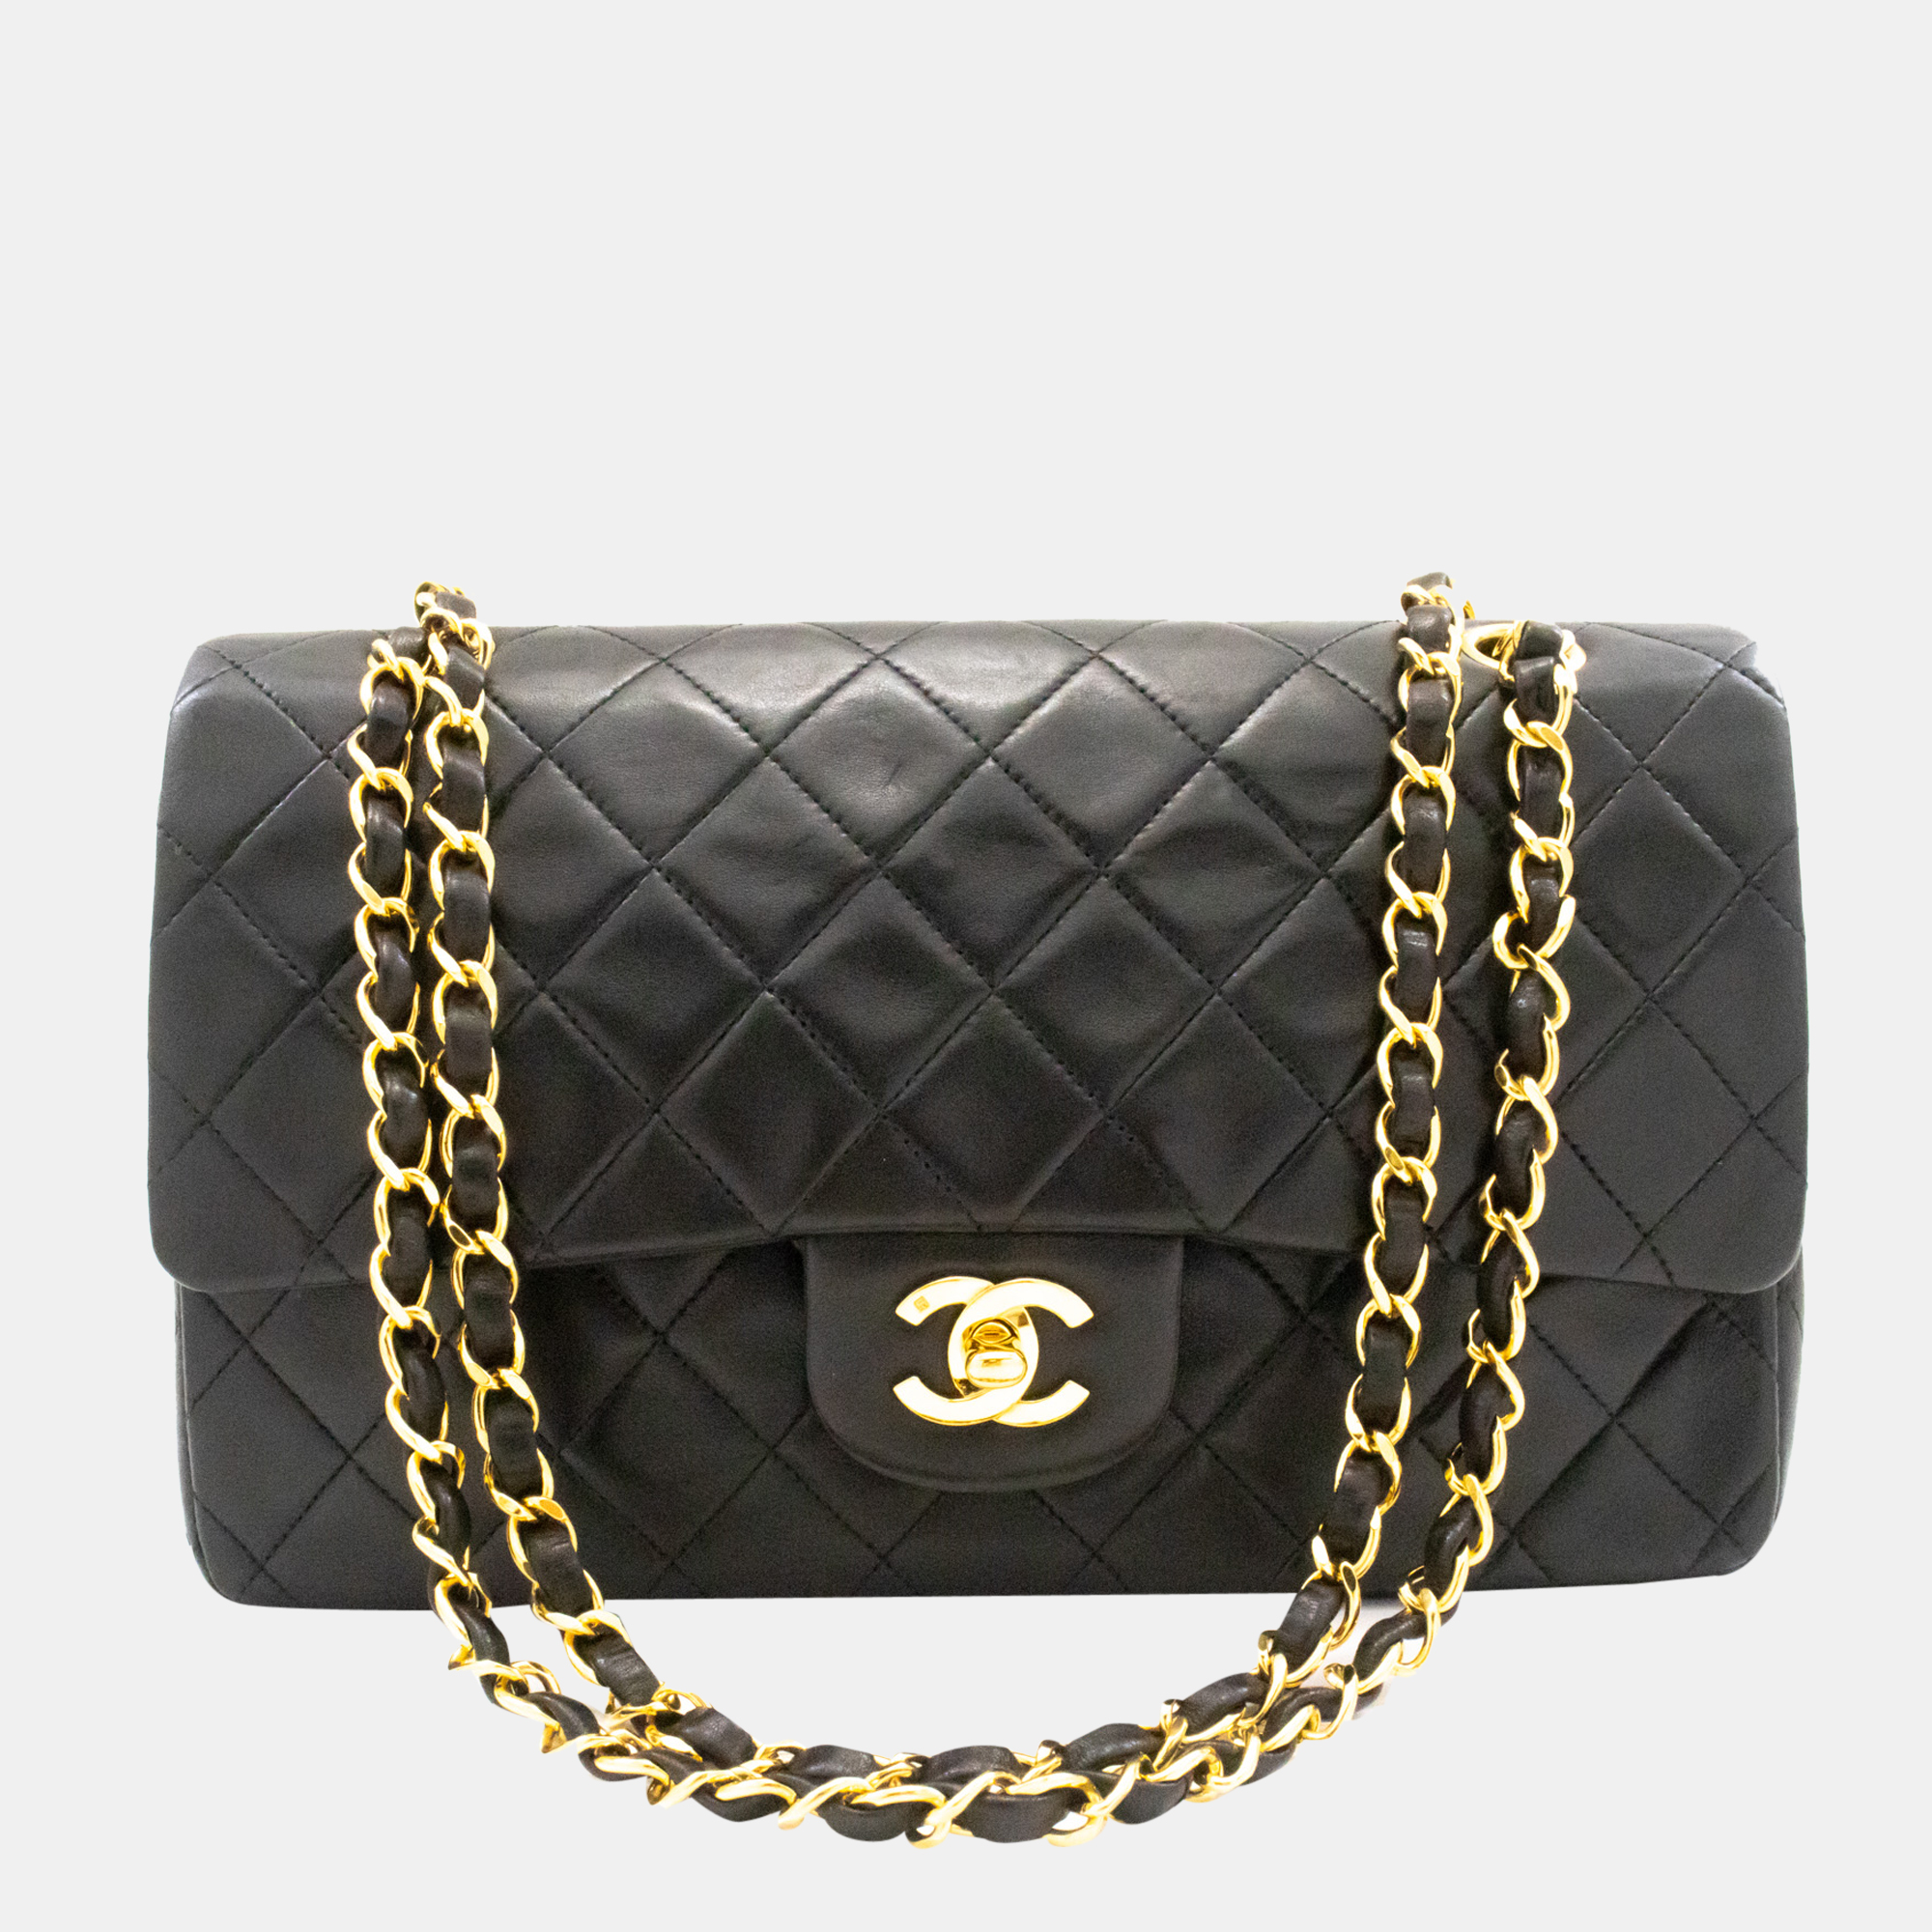 Chanel Black Leather Classic Double Flap Bag